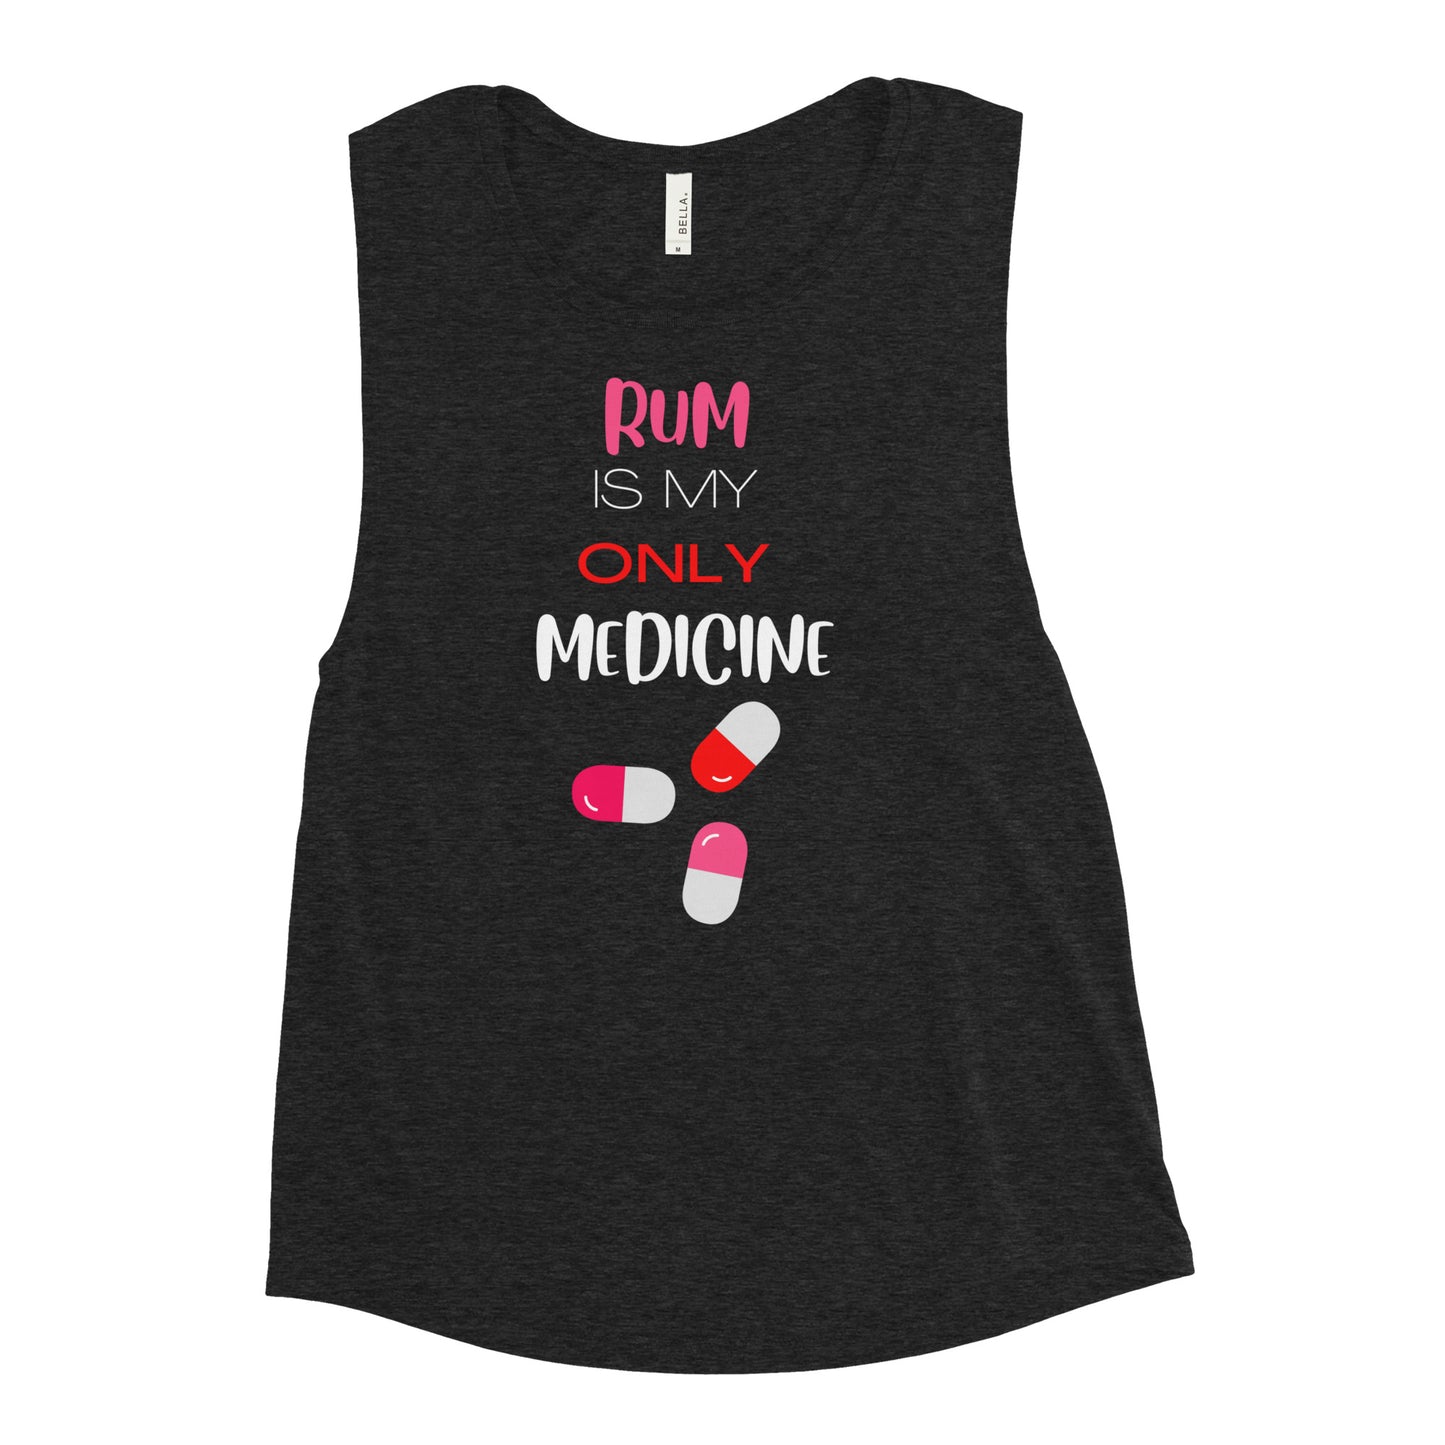 "Rum is my only medicine" Women's Muscle Tank